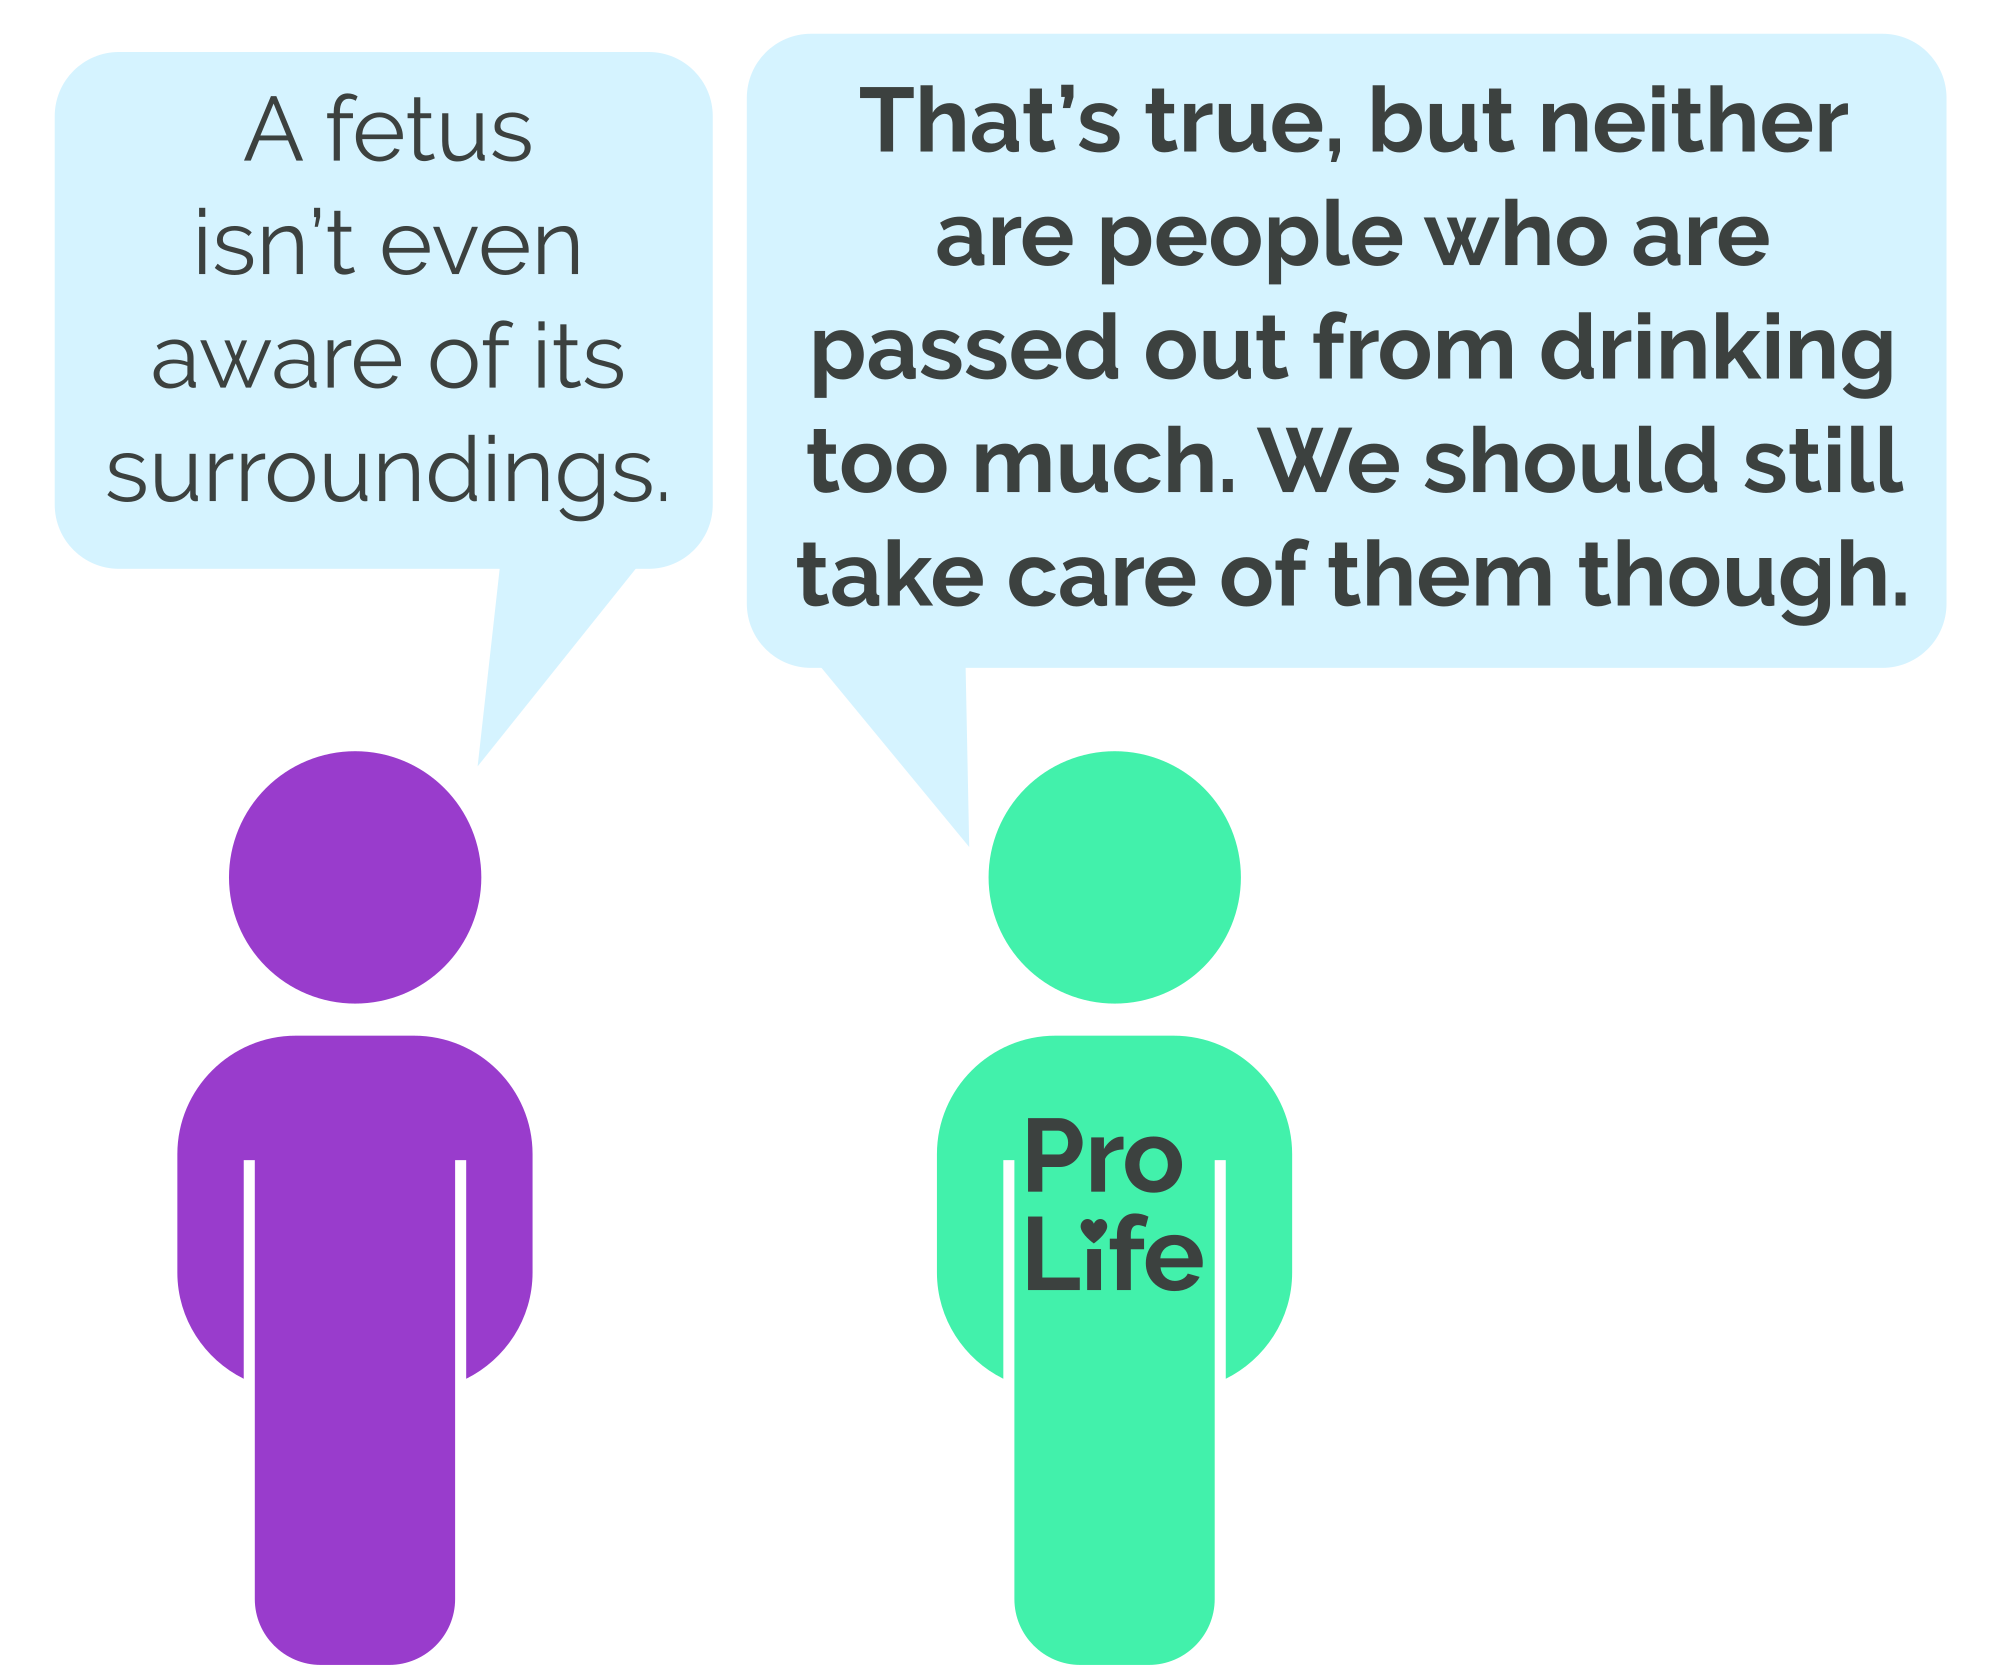 Person 1: A fetus isn’t even aware of its surroundings. Person 2 (our hero): That’s true, but neither are people who are passed out from drinking too much. We should still take care of them though.